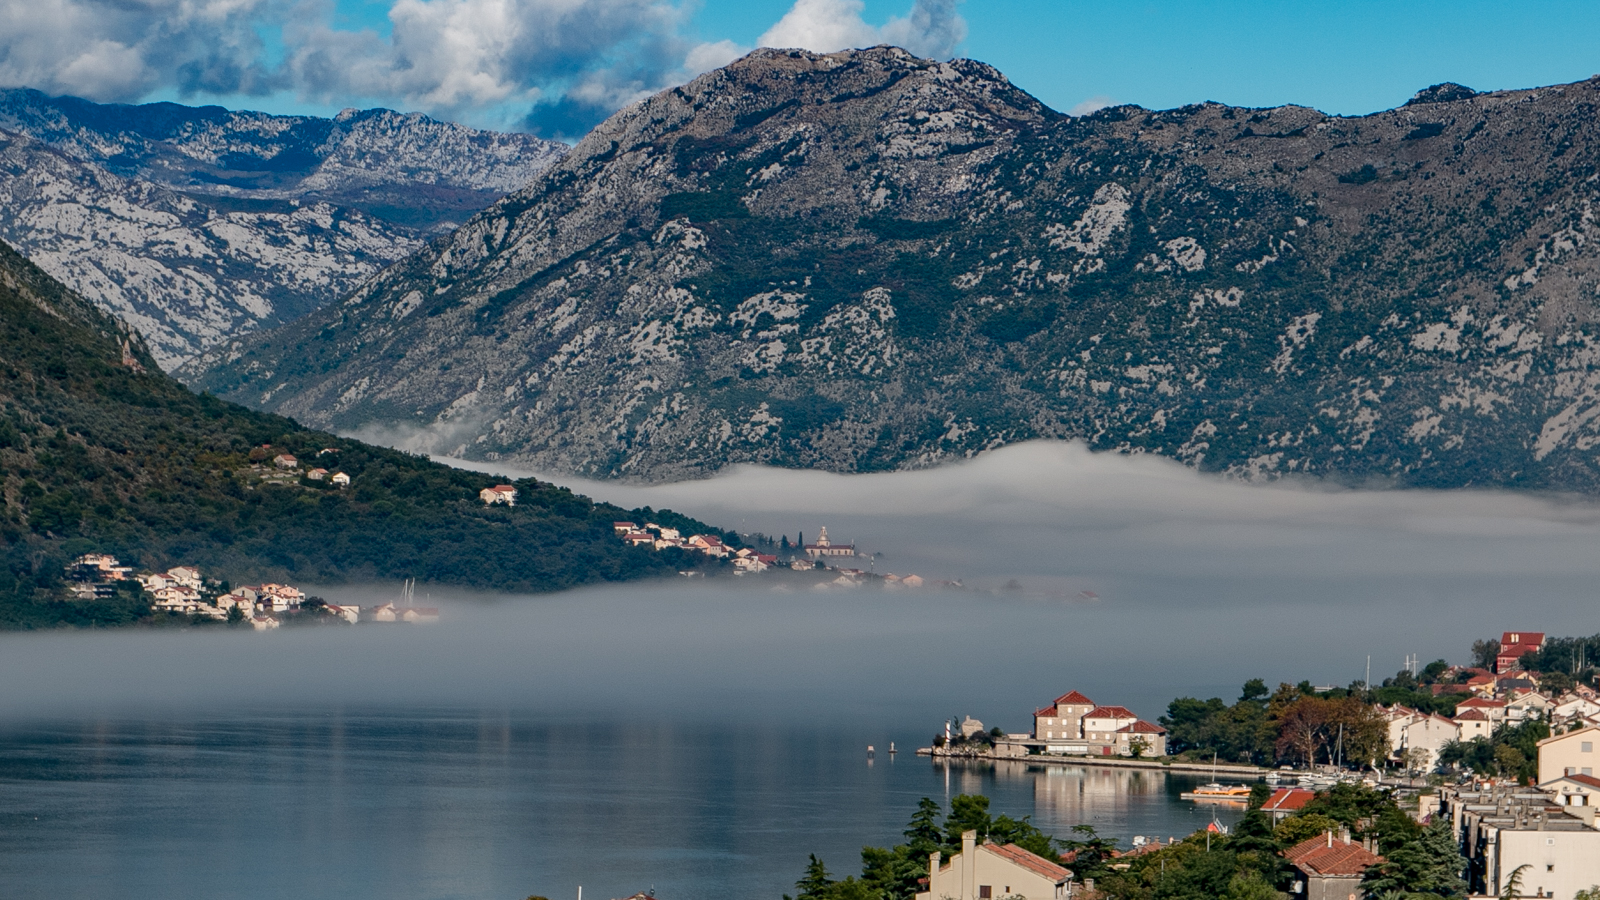 I Hiked: The Sveti Ivan Fortress (Kotor, Montenegro) - 100 Days and Nights